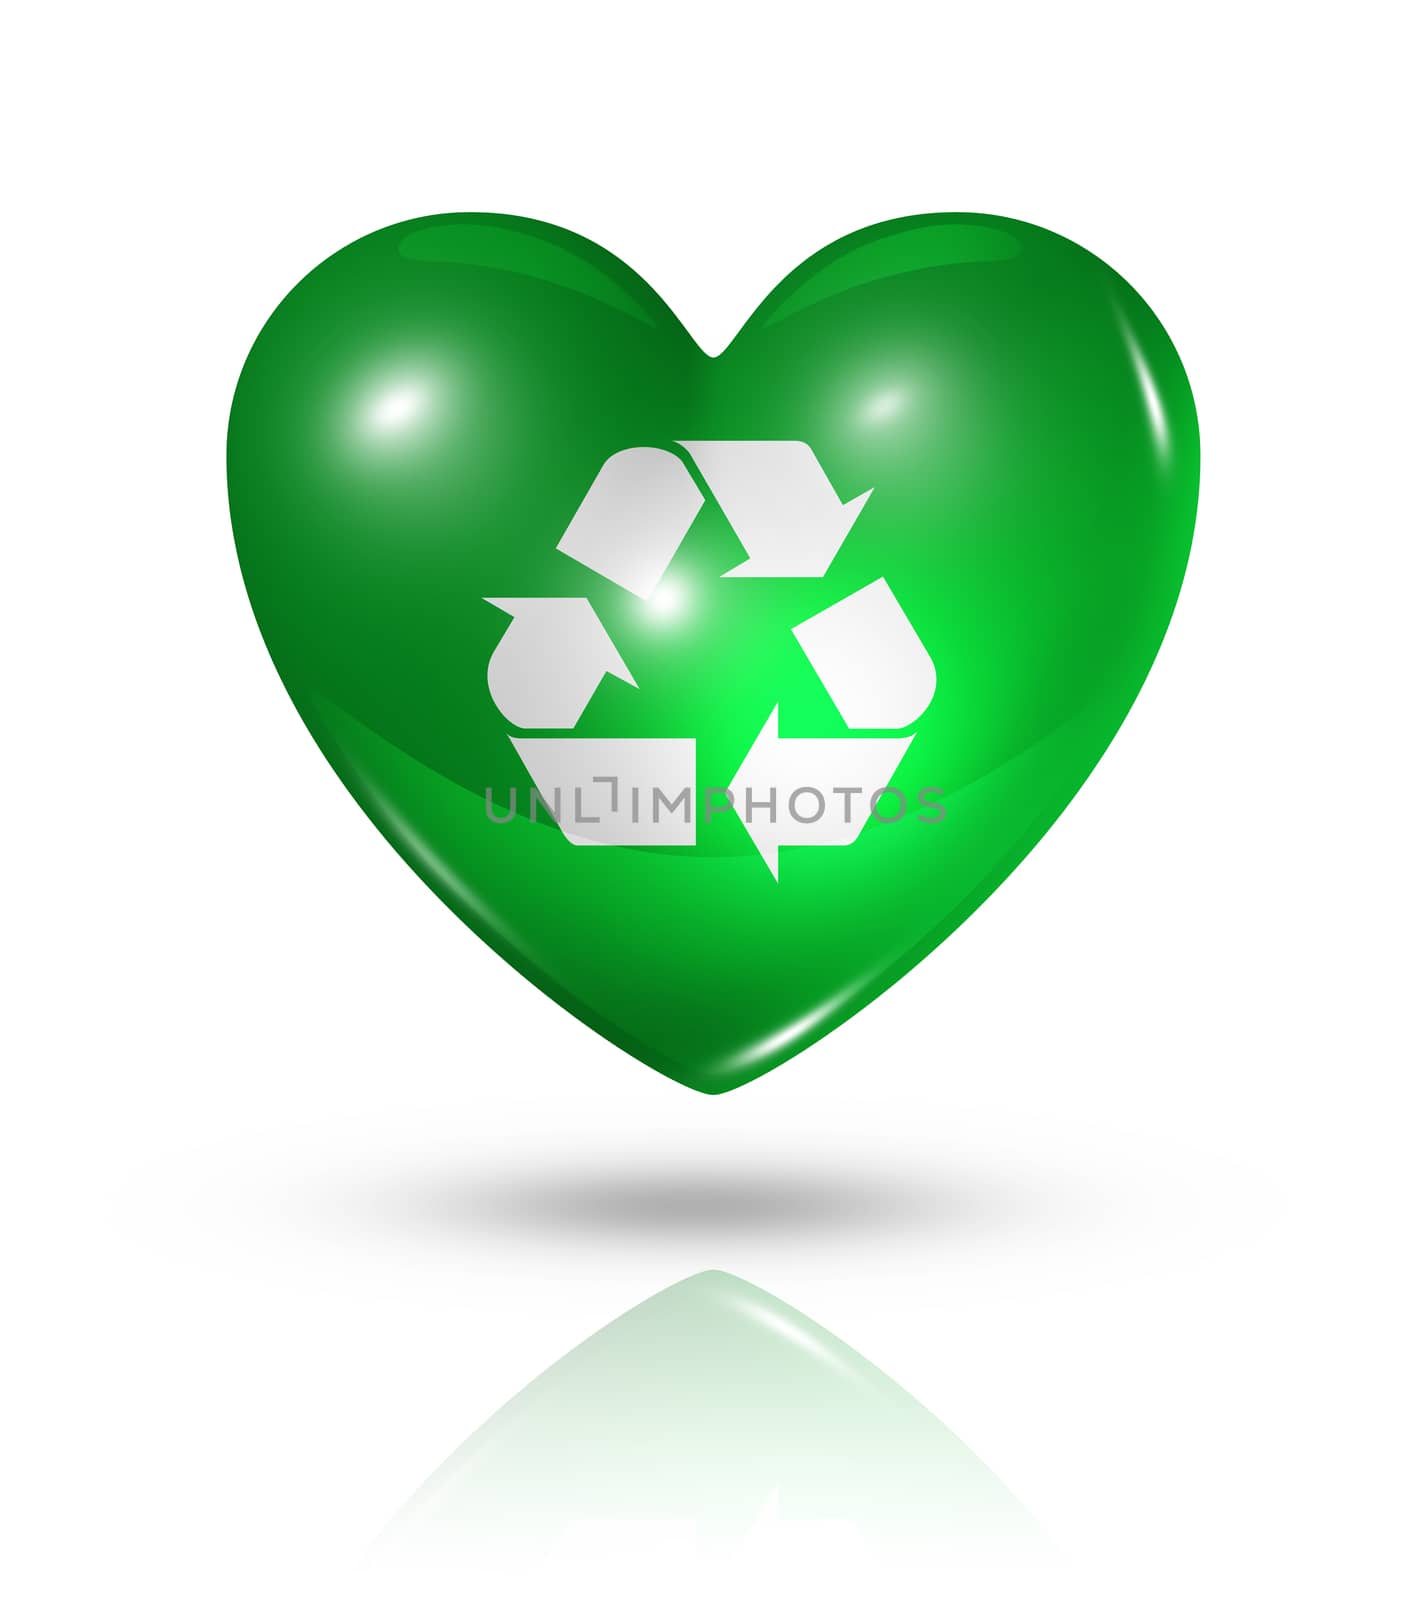 Love recycling, environment symbol. 3D heart icon isolated on white with clipping path